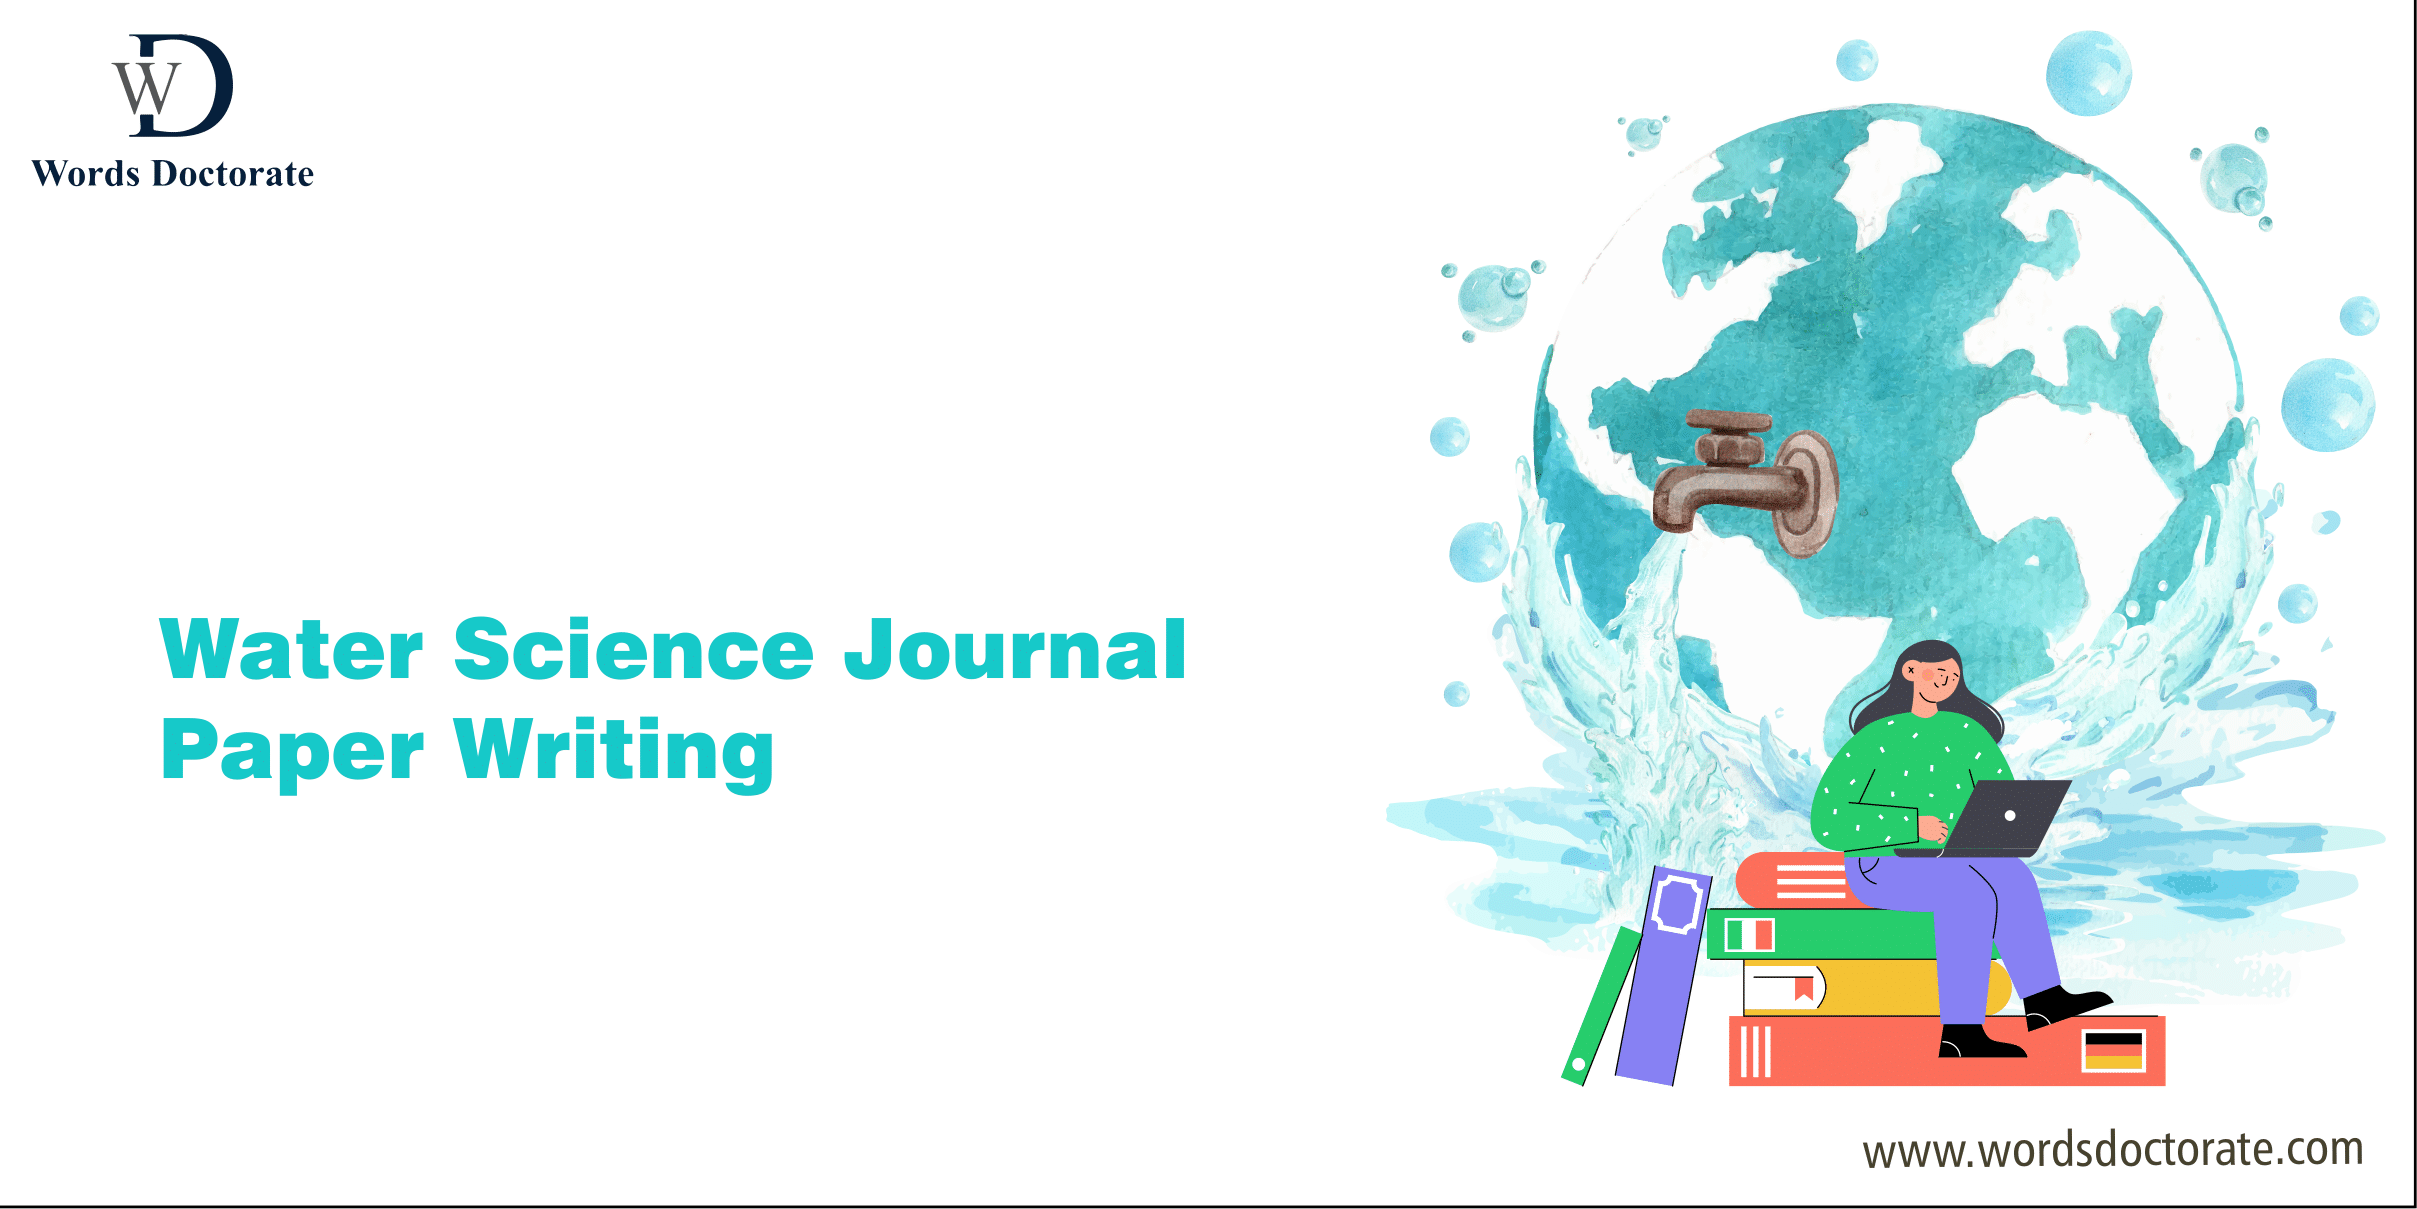 Water Science Journal Paper Writing